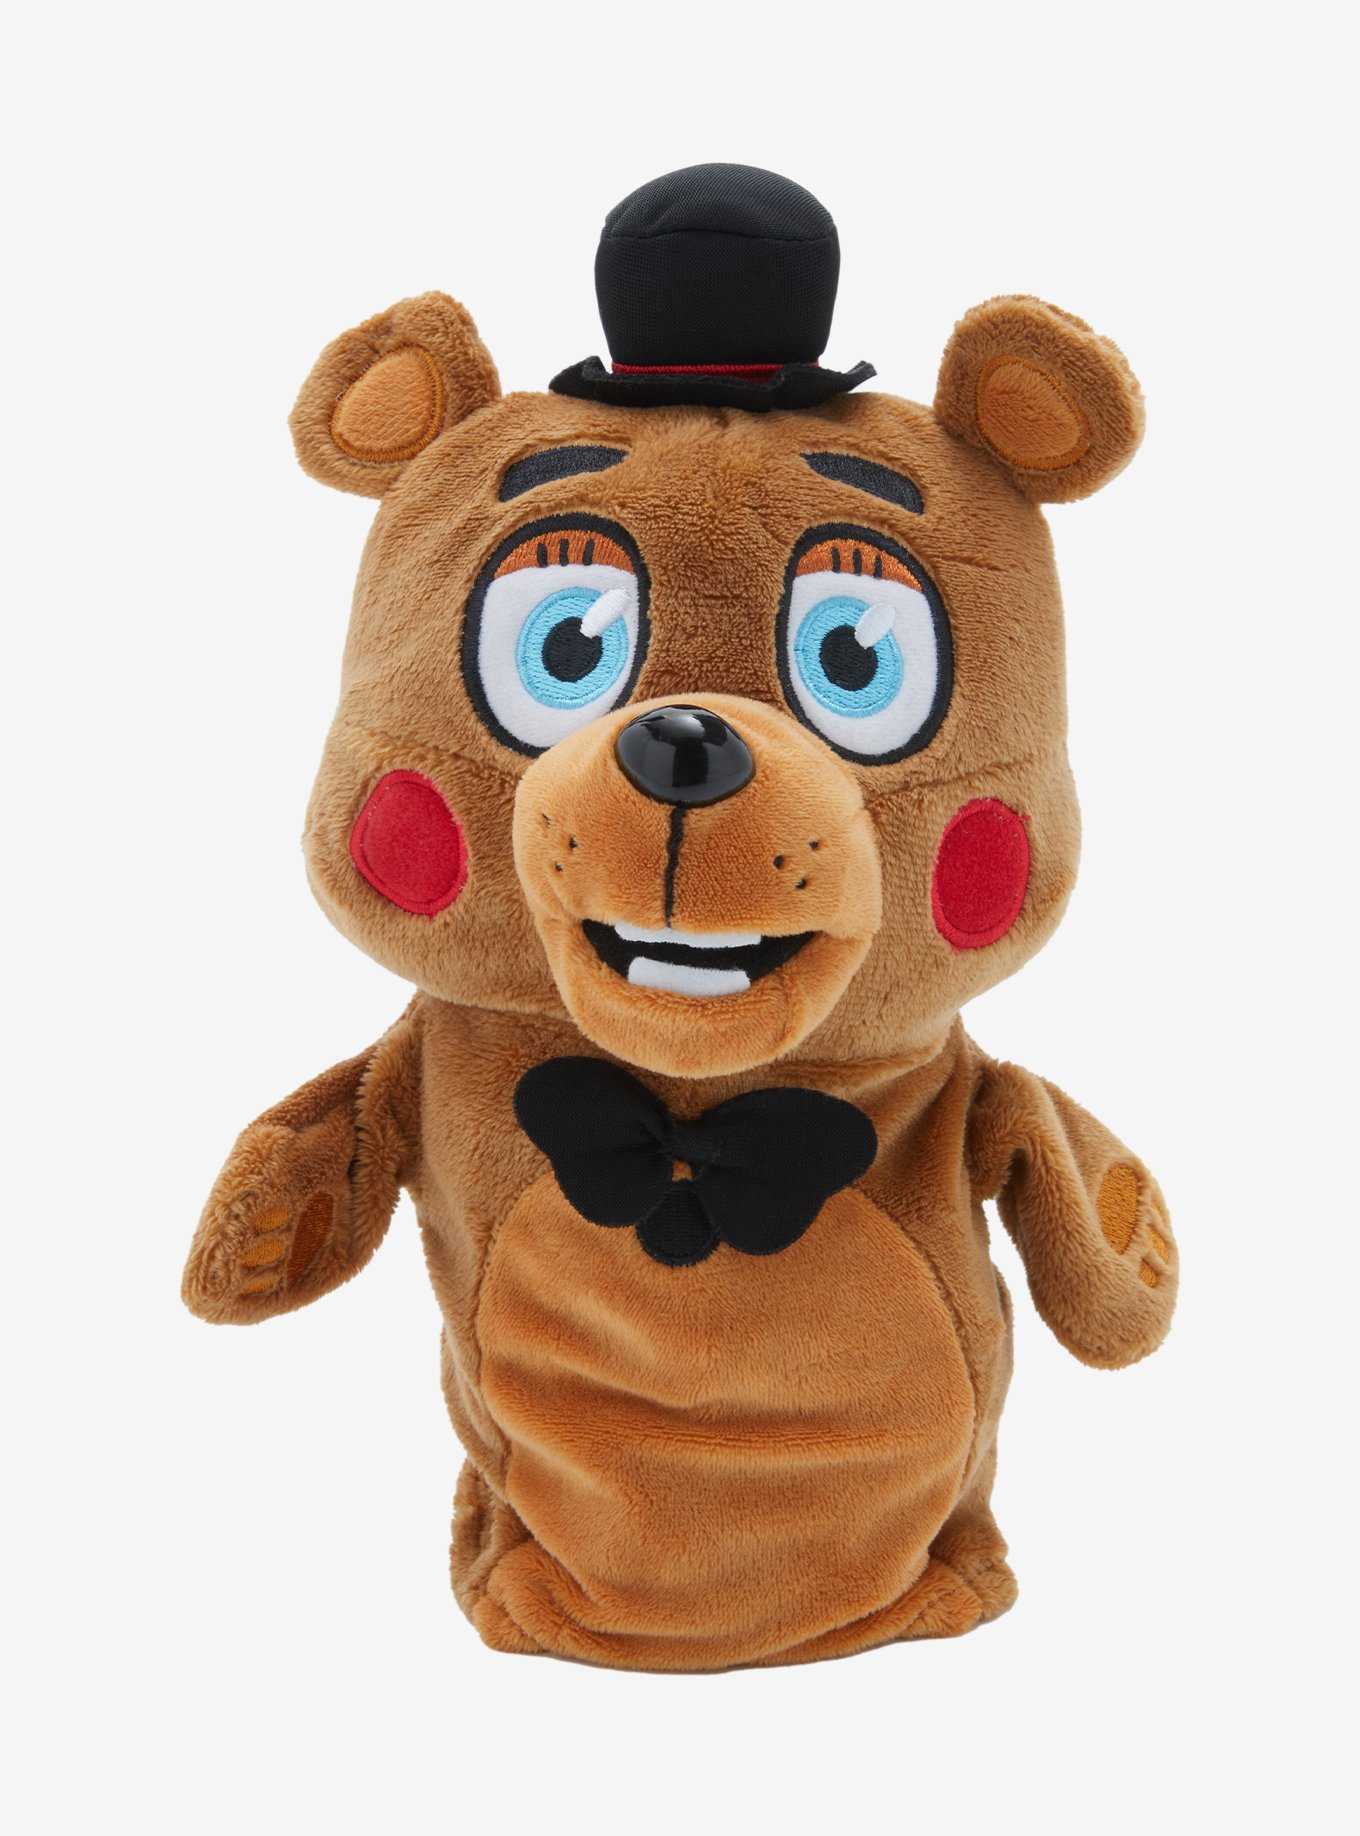 FazBearCollects on X: 🐻🍕NEW FNAF MERCH AT THE HOTTOPIC WEBSITE INLCUDING  A BEANIE, NECKLACES, BRACLETS AND EARRINGS!!!🍕🐻 #hottopic #fnaf  #securitybreach #fivenightsatfreddys #scottcawthon #fnafnews #fnafmerch   / X